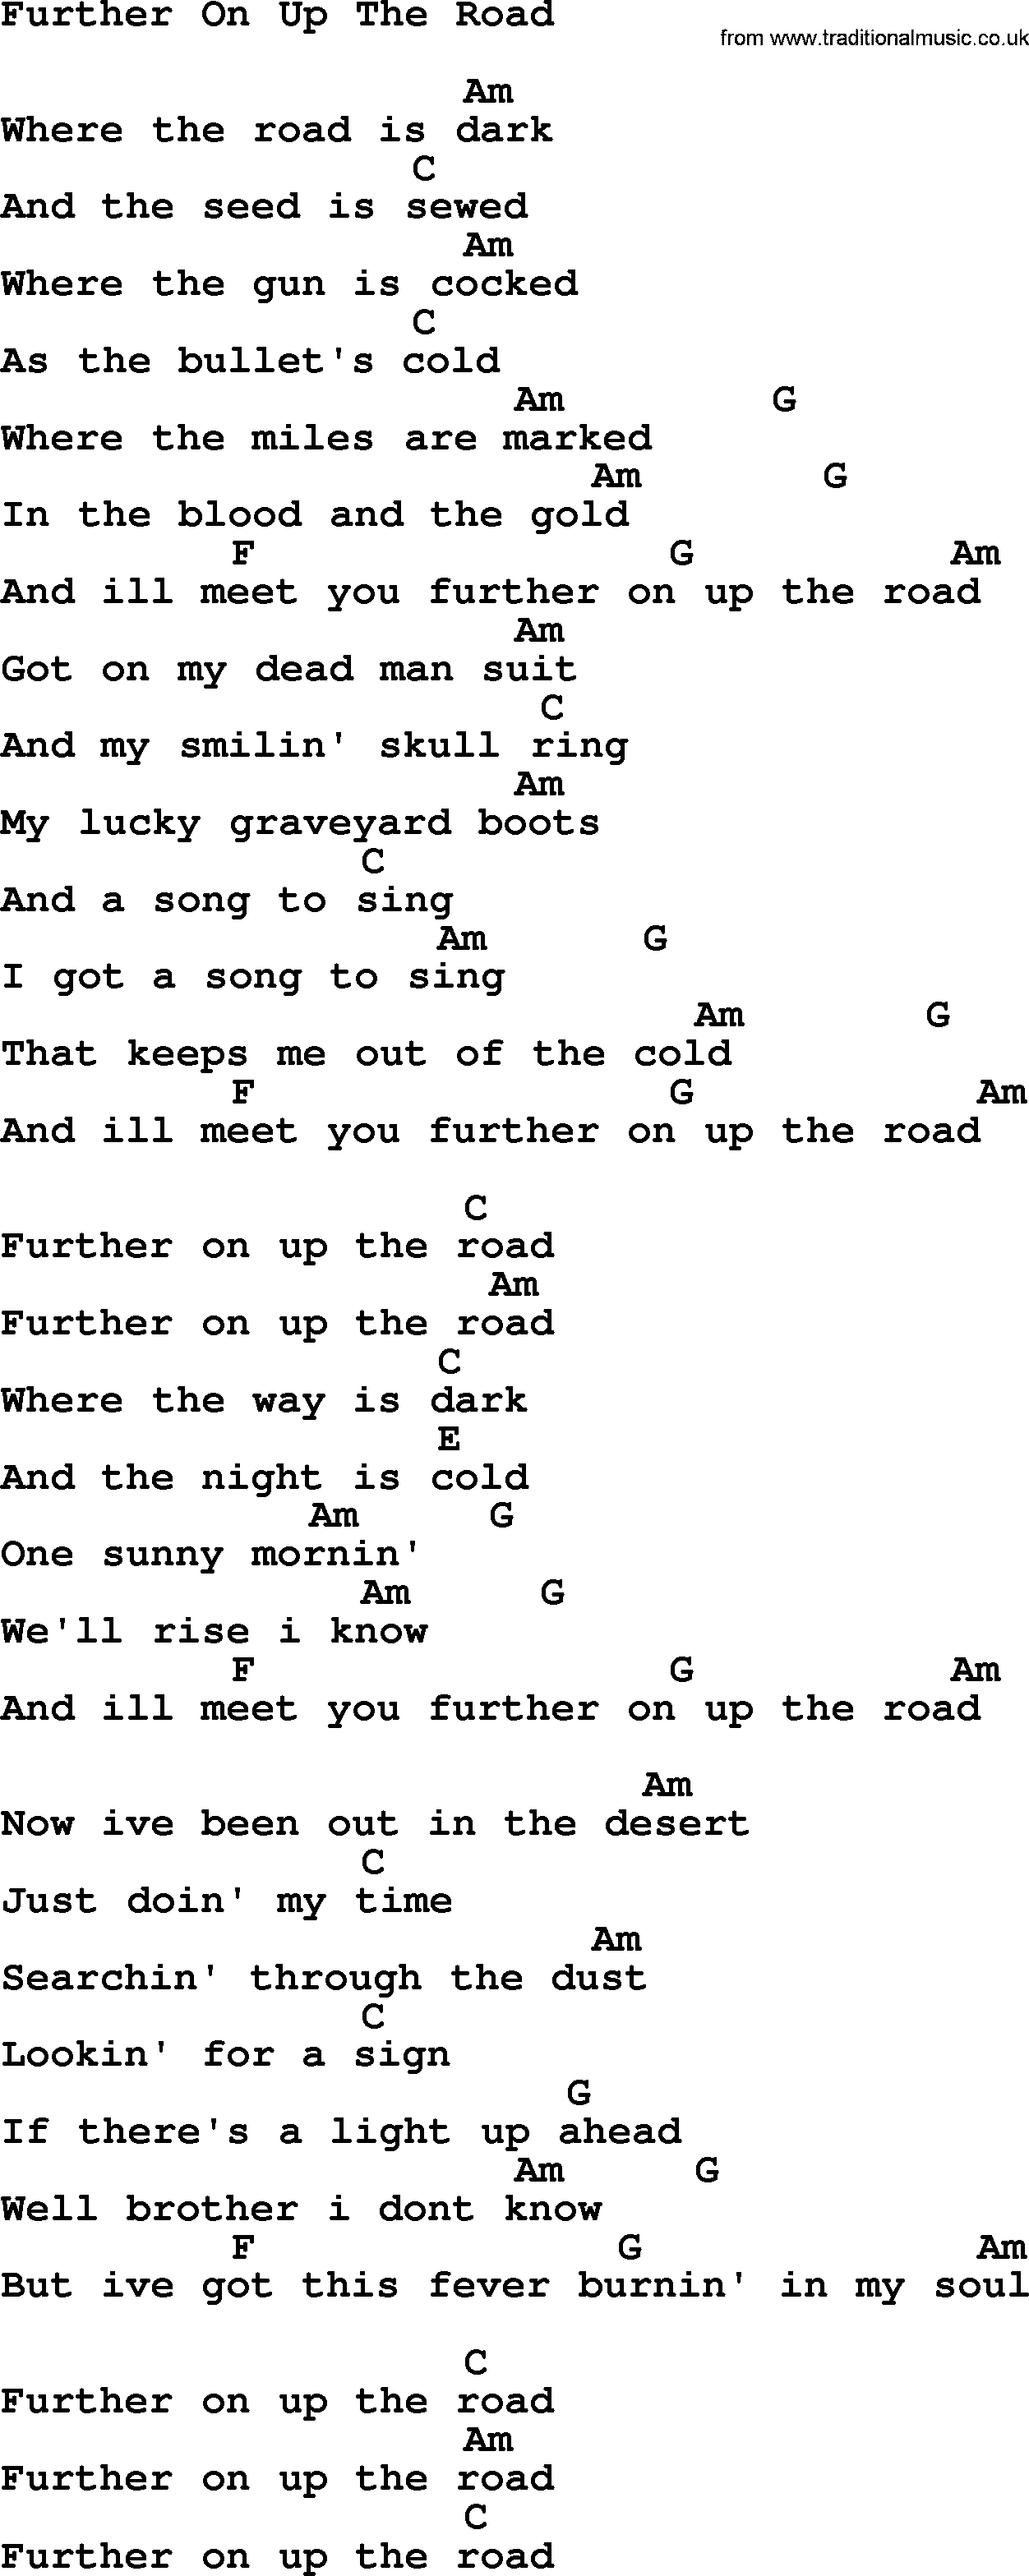 Johnny Cash song Further On Up The Road(1), lyrics and chords